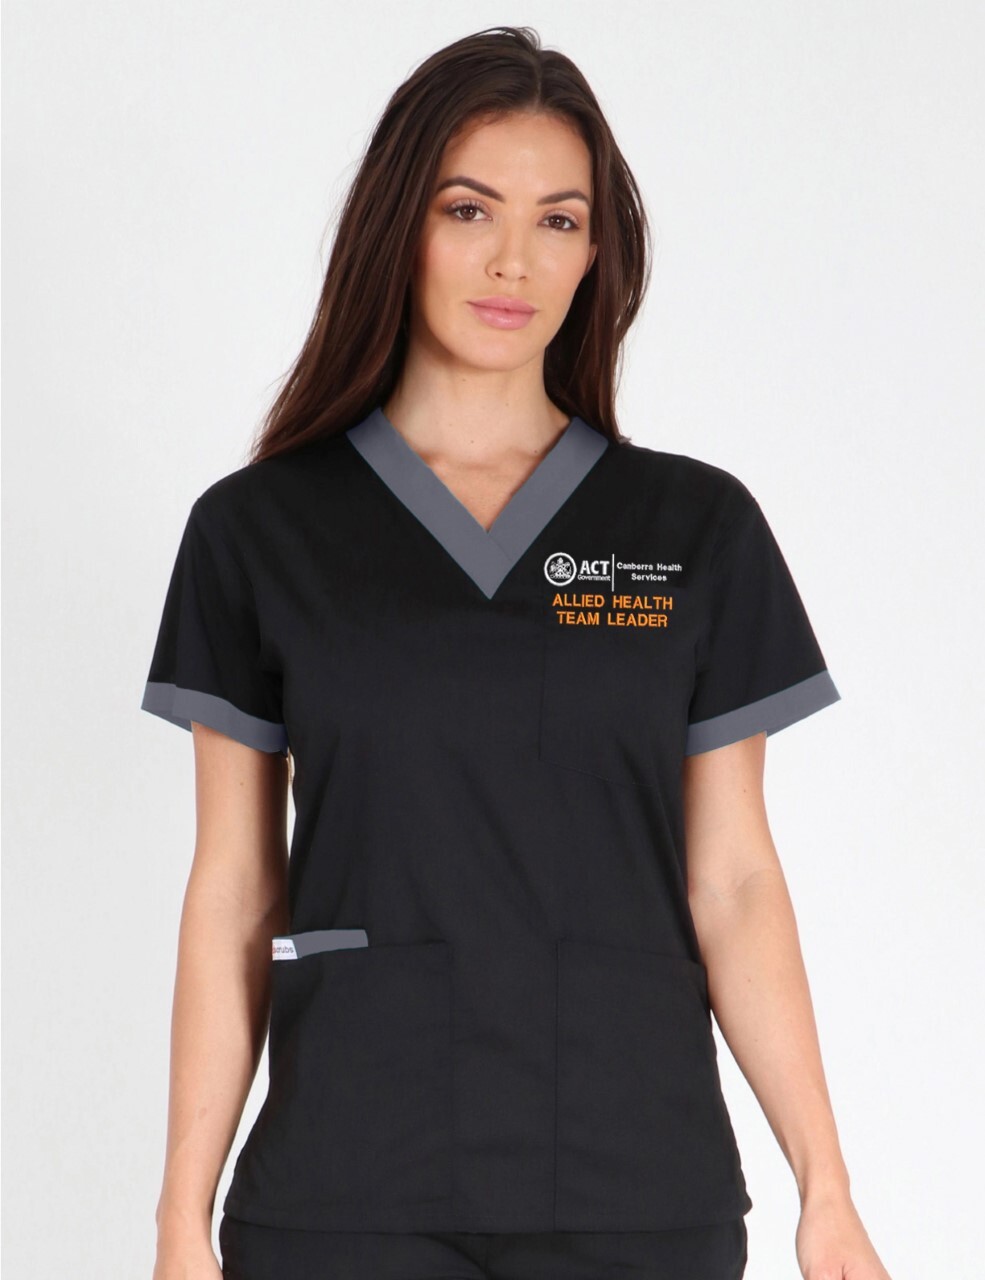 Canberra Hospital - Allied Health Team Leader (Contrast 4 Pkt in Black with Steel Grey Trim with Cargo Pants incl Logos)